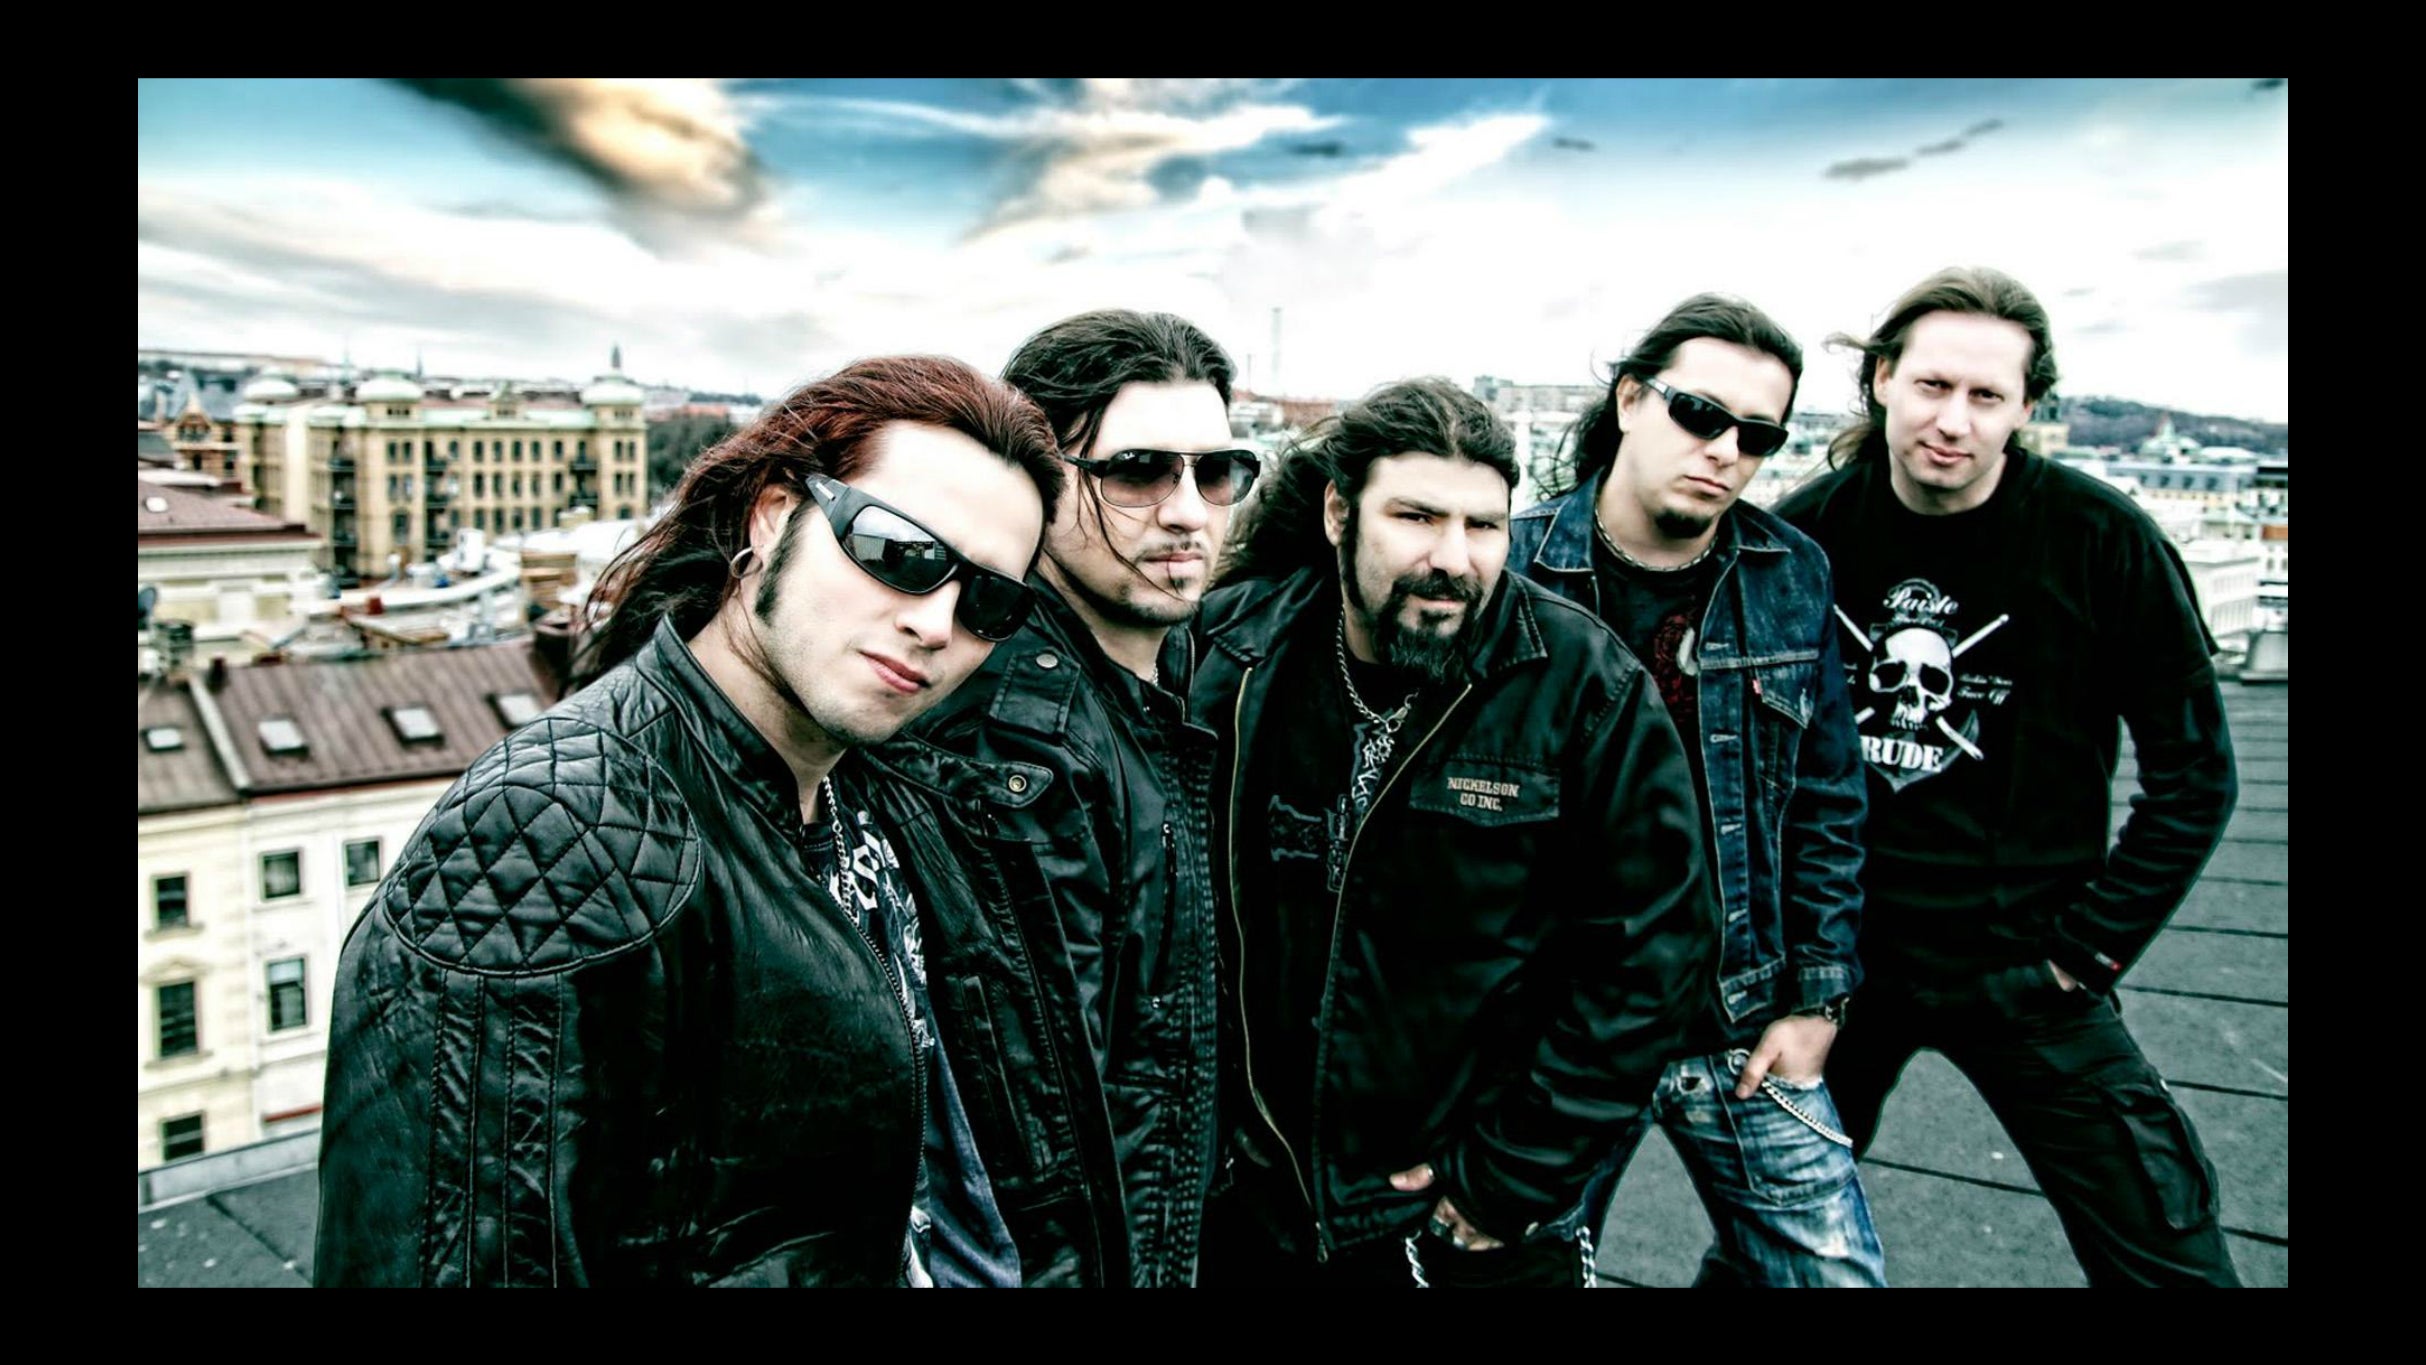 Firewind with special guests at Brick by Brick